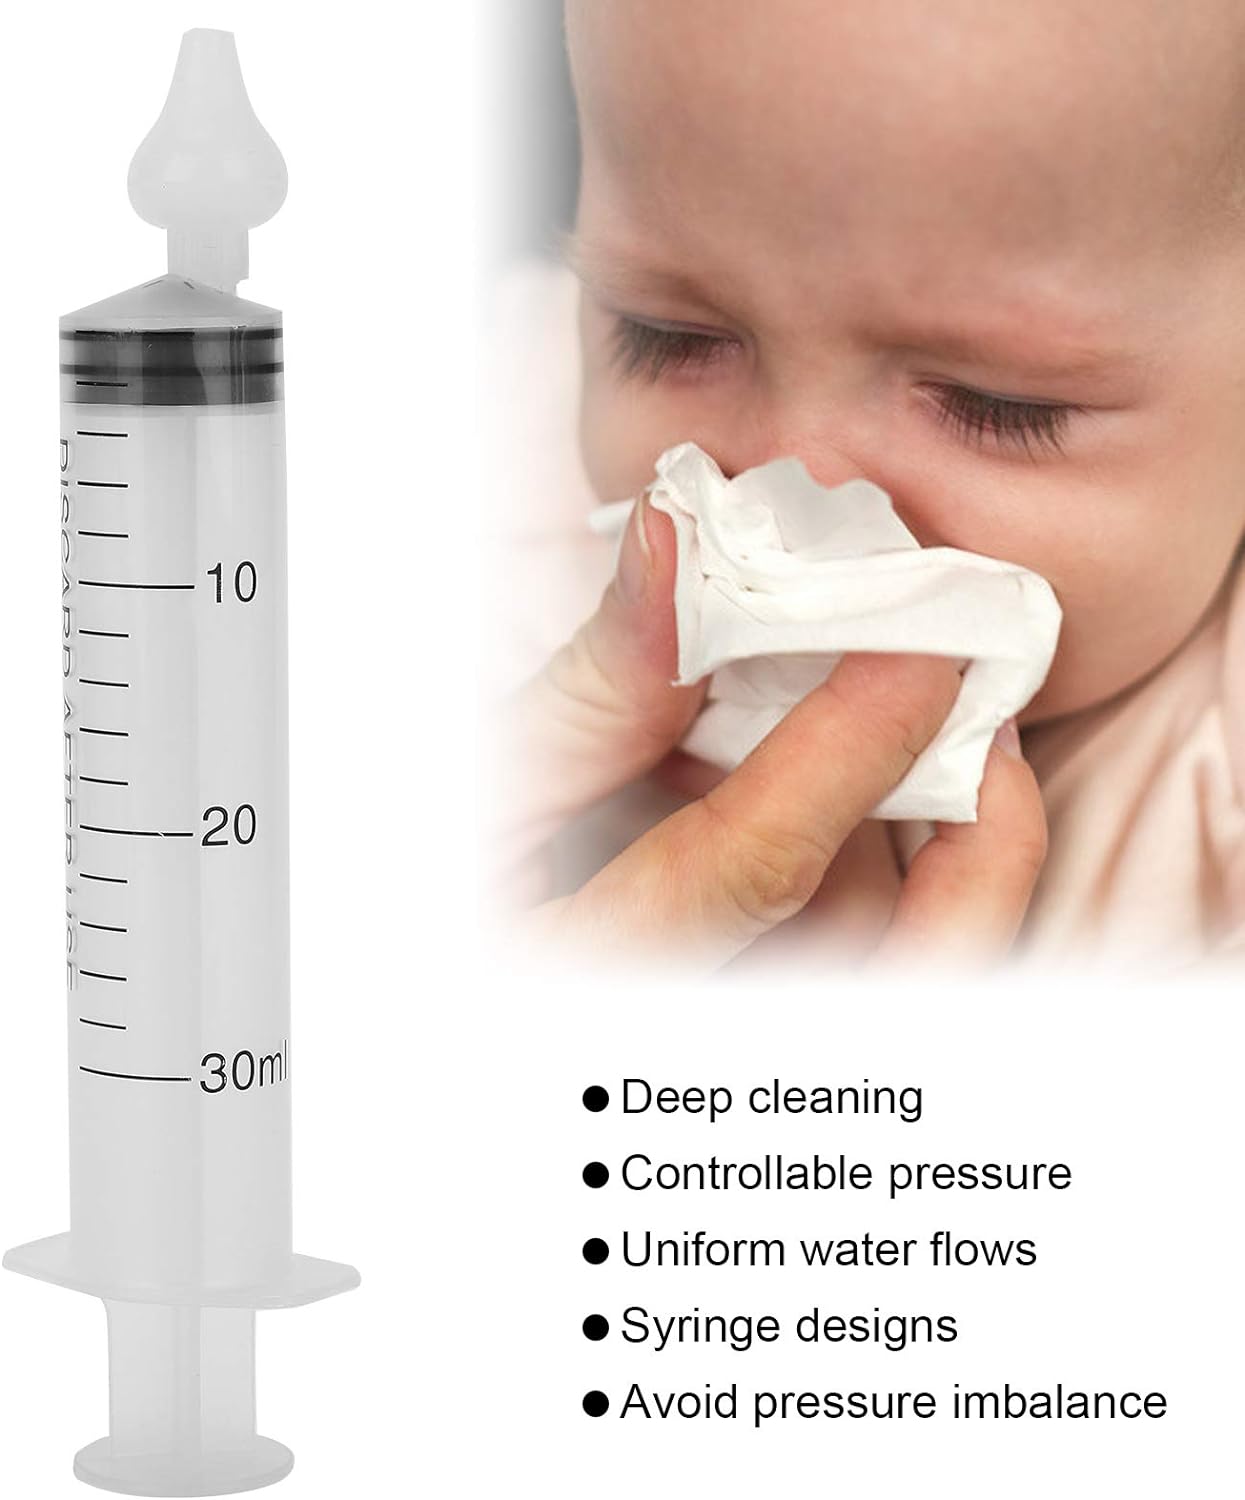 Baby Nasal Aspirator, 4pcs 30ml Portable Syringe Baby Nasal Irrigator Professional Infant Nose Cleaner Rinsing Device with Reusable Silicone Nasal Suction Tip and Transparent Box for Kids Children : Baby